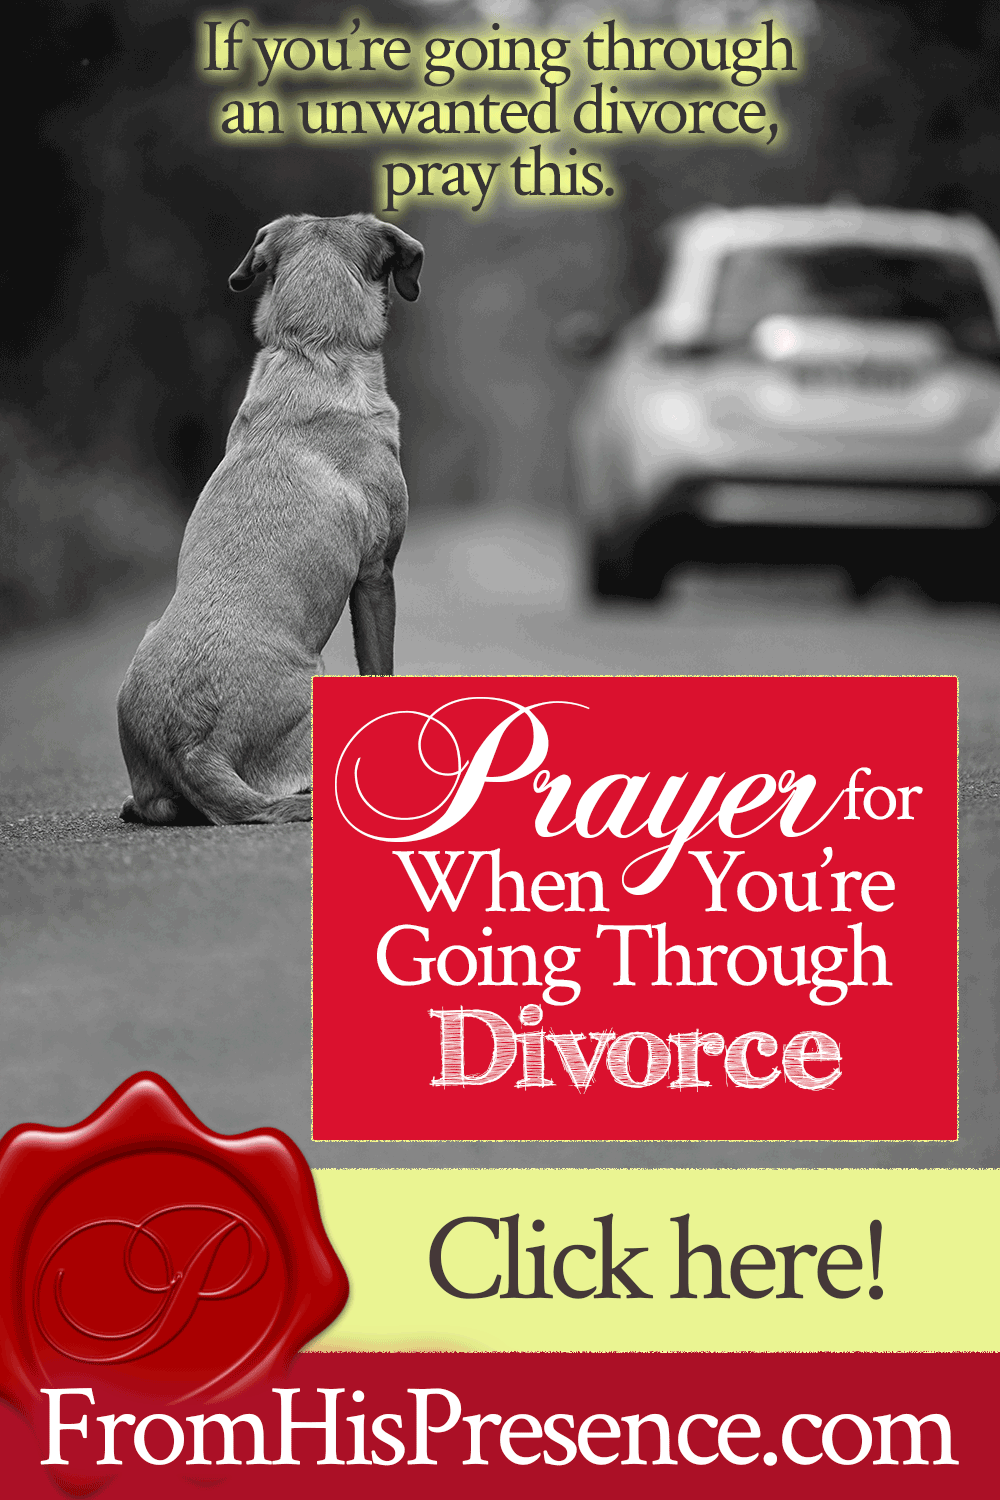 Prayer for When You're Going Through a Divorce | FromHisPresence.com